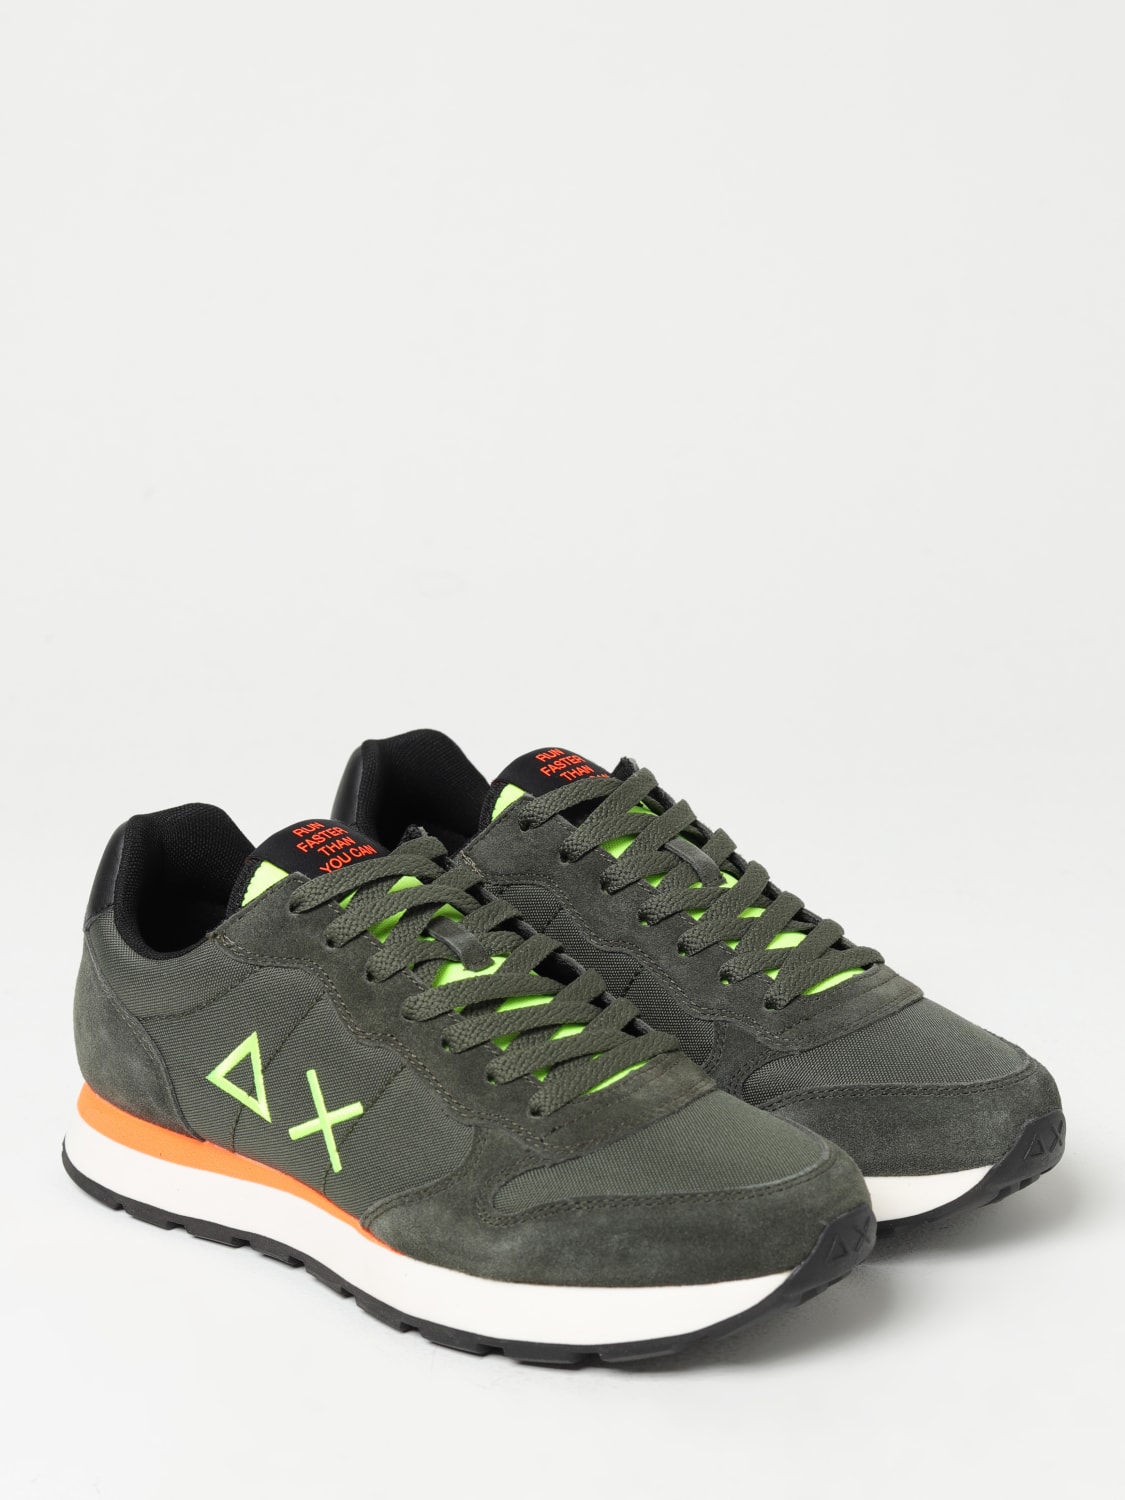 SUN 68: sneakers for man - Military | Sun 68 sneakers Z43102 online at ...